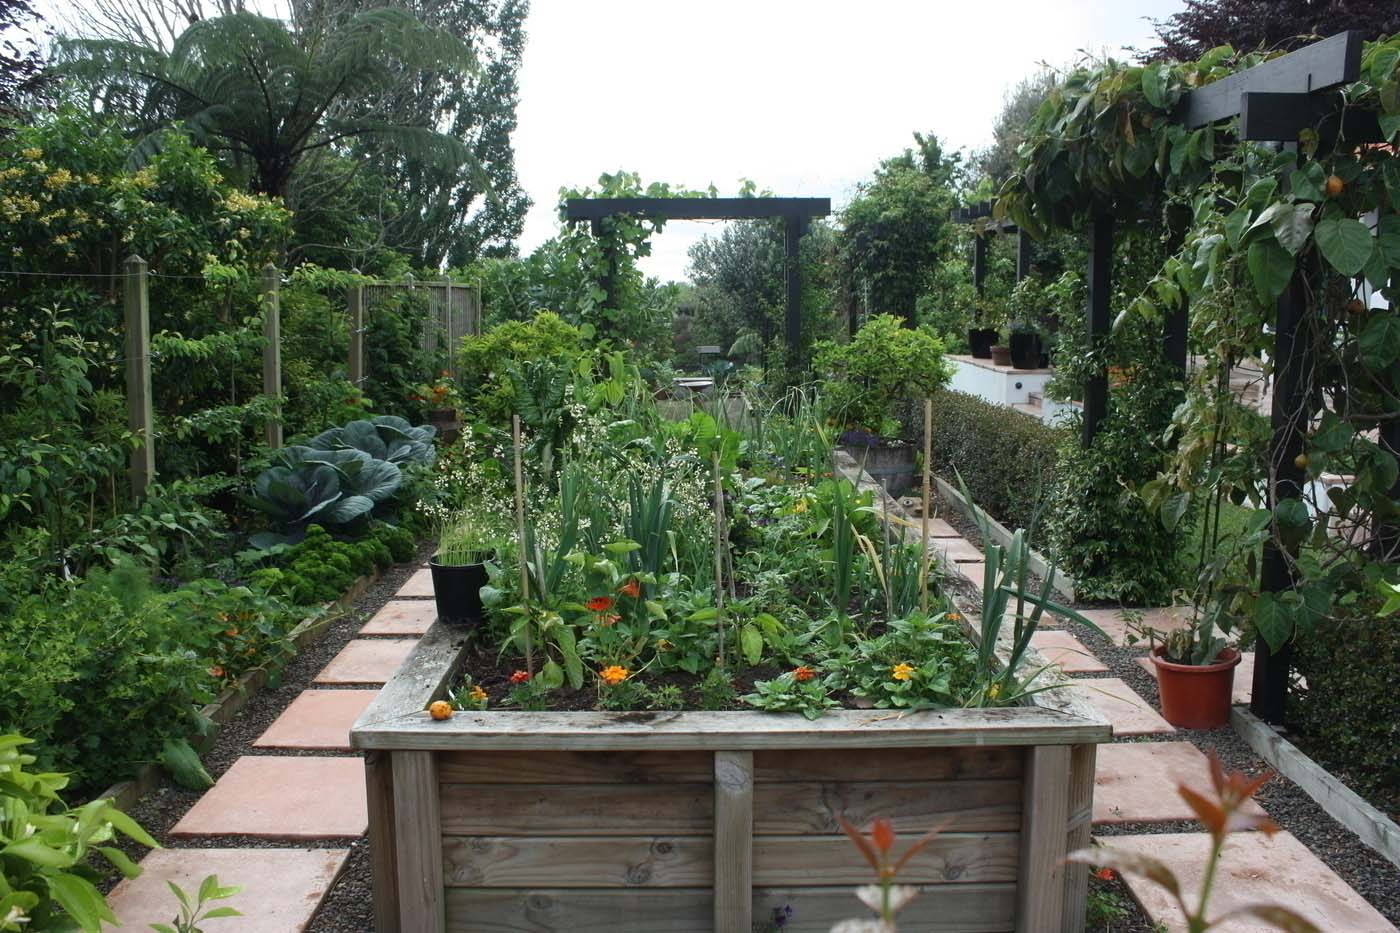 More raised vegetable gardens and espeliered fruit